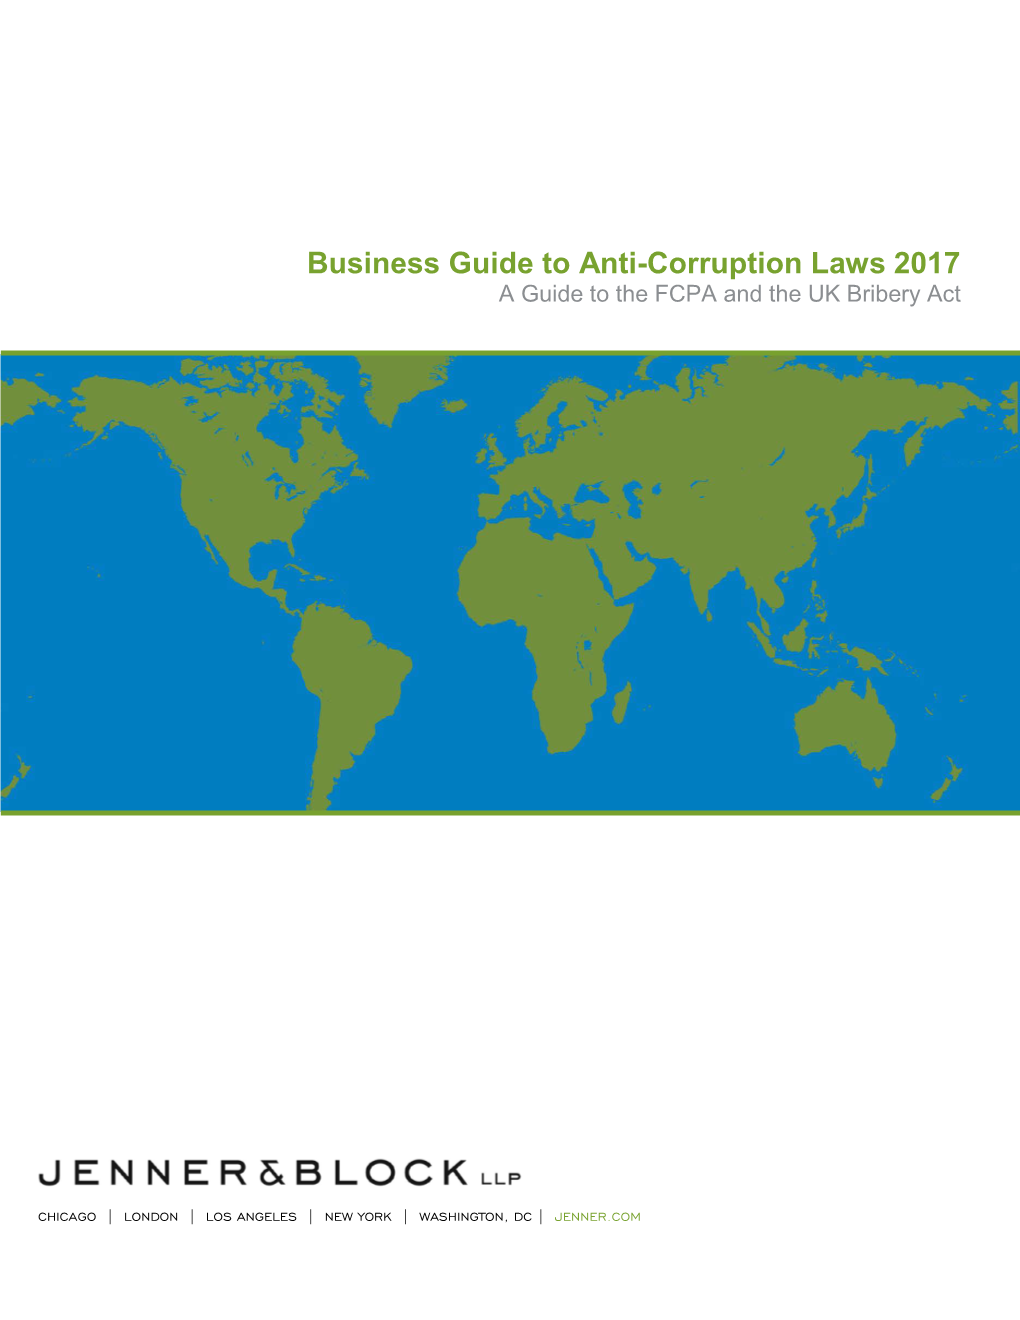 Business Guide to Anti-Corruption Laws 2017 a Guide to the FCPA and the UK Bribery Act